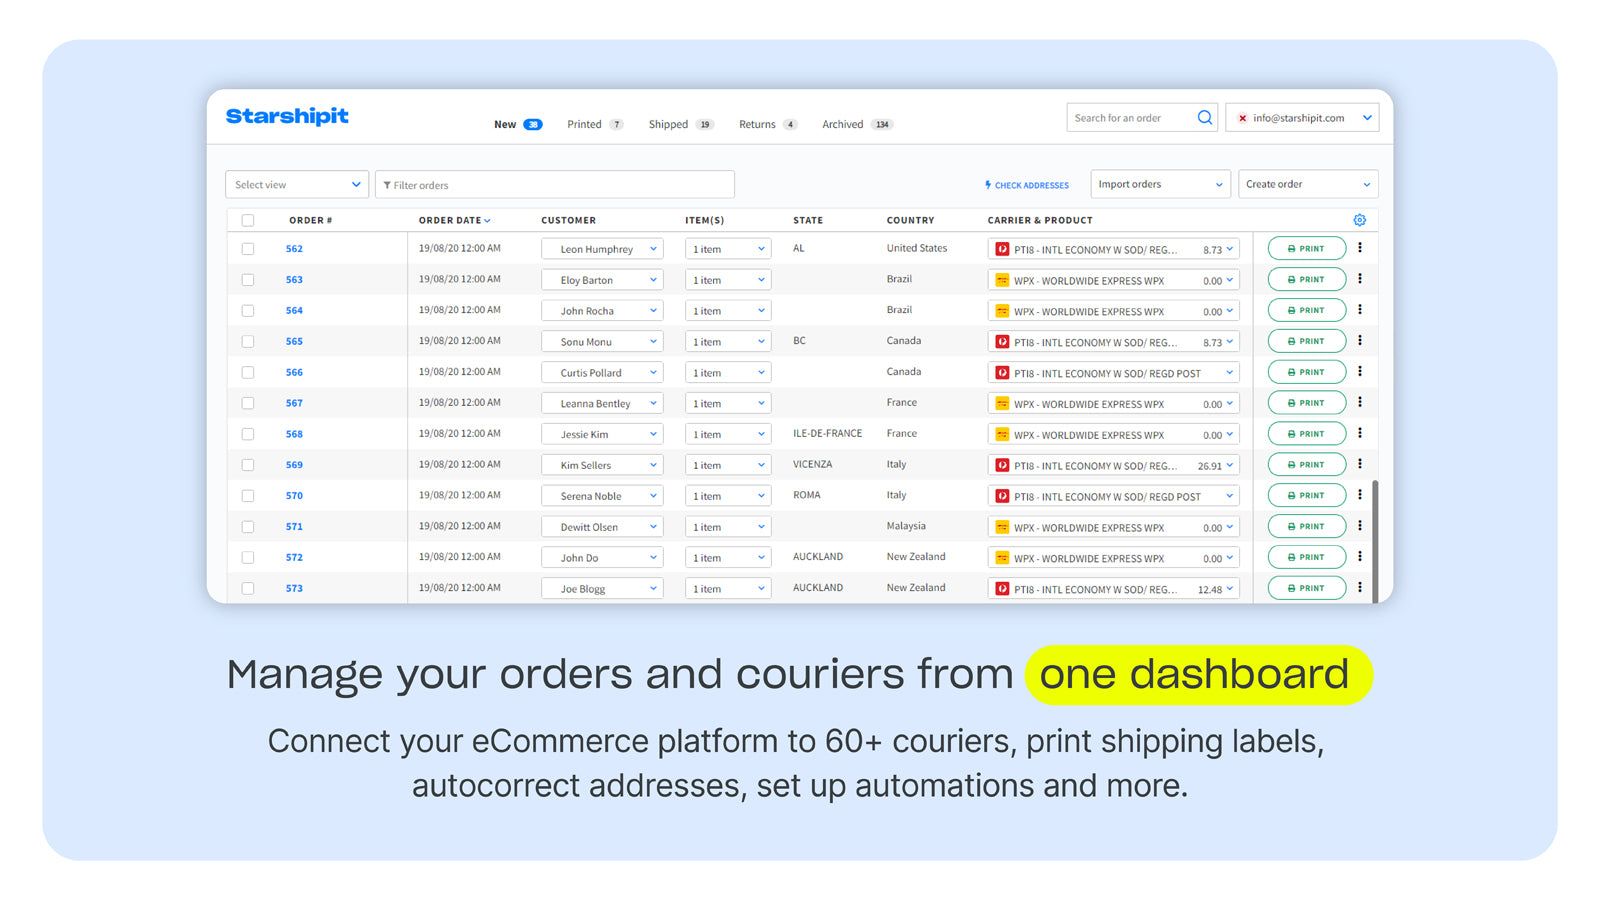 Starshipit multi courier dashboard for fulfilling online orders